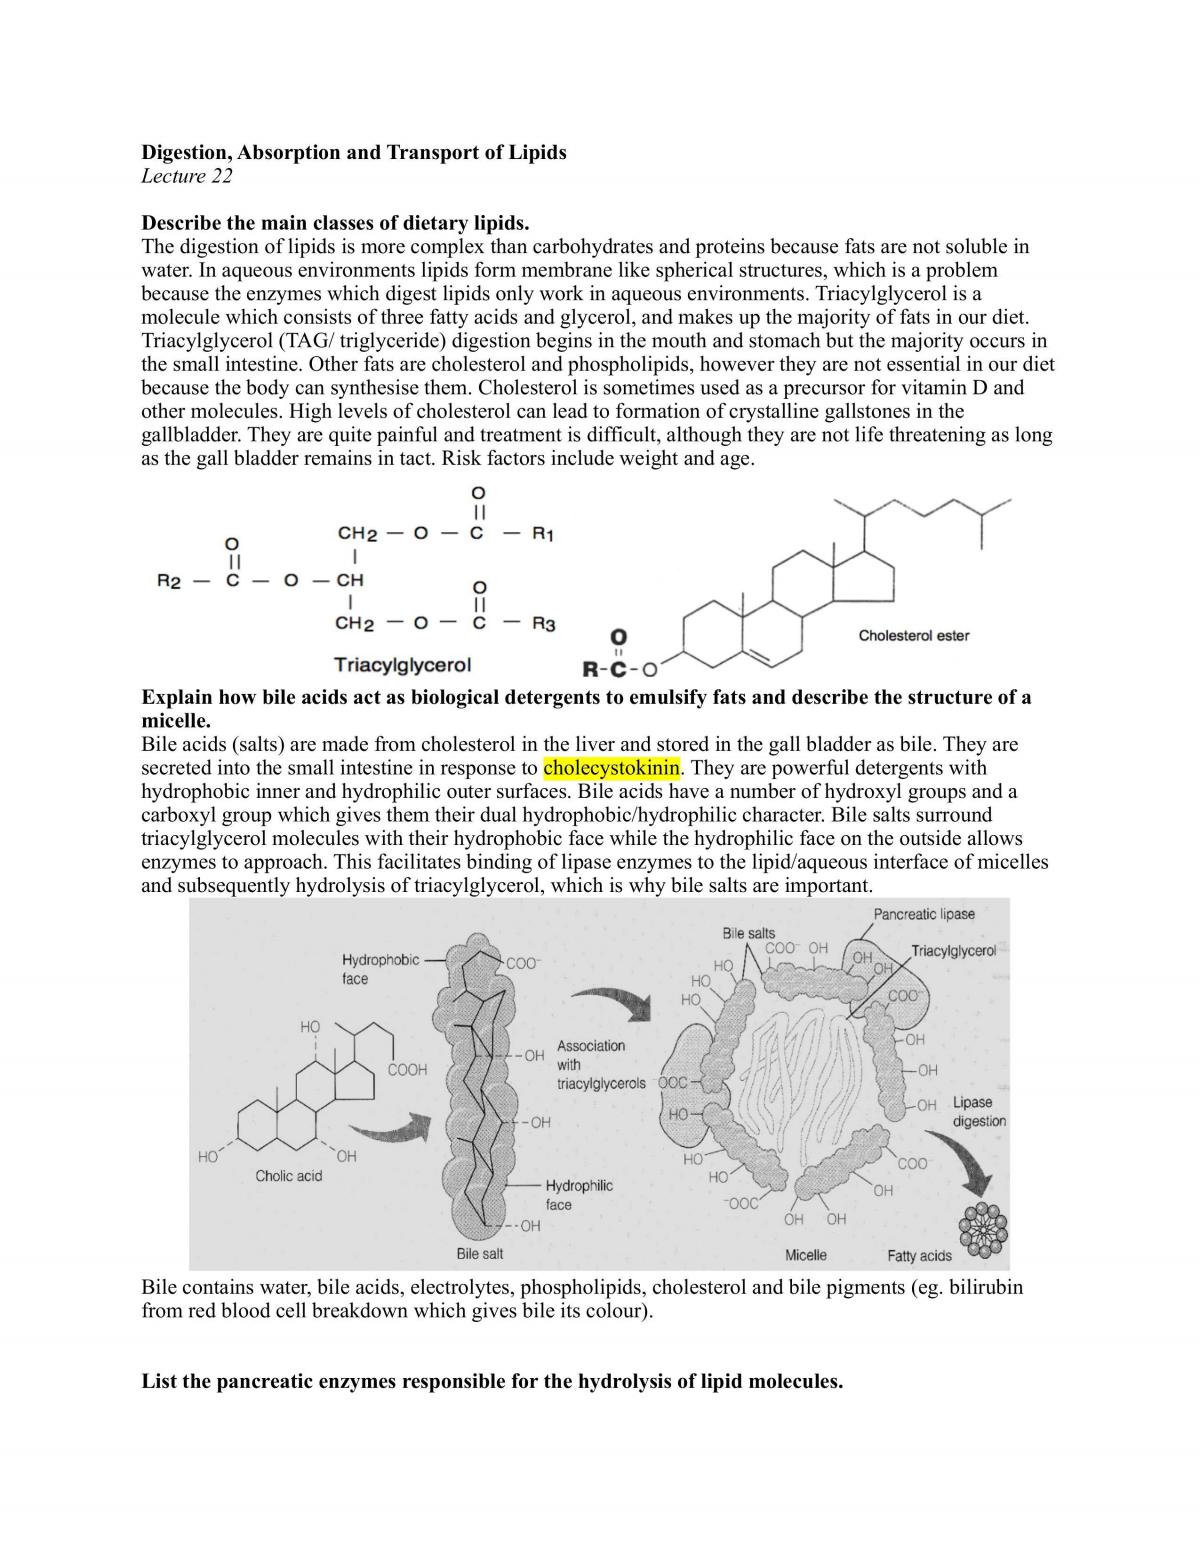 Complete BIOC192 (Foundations of Biochemistry) notes - Page 45